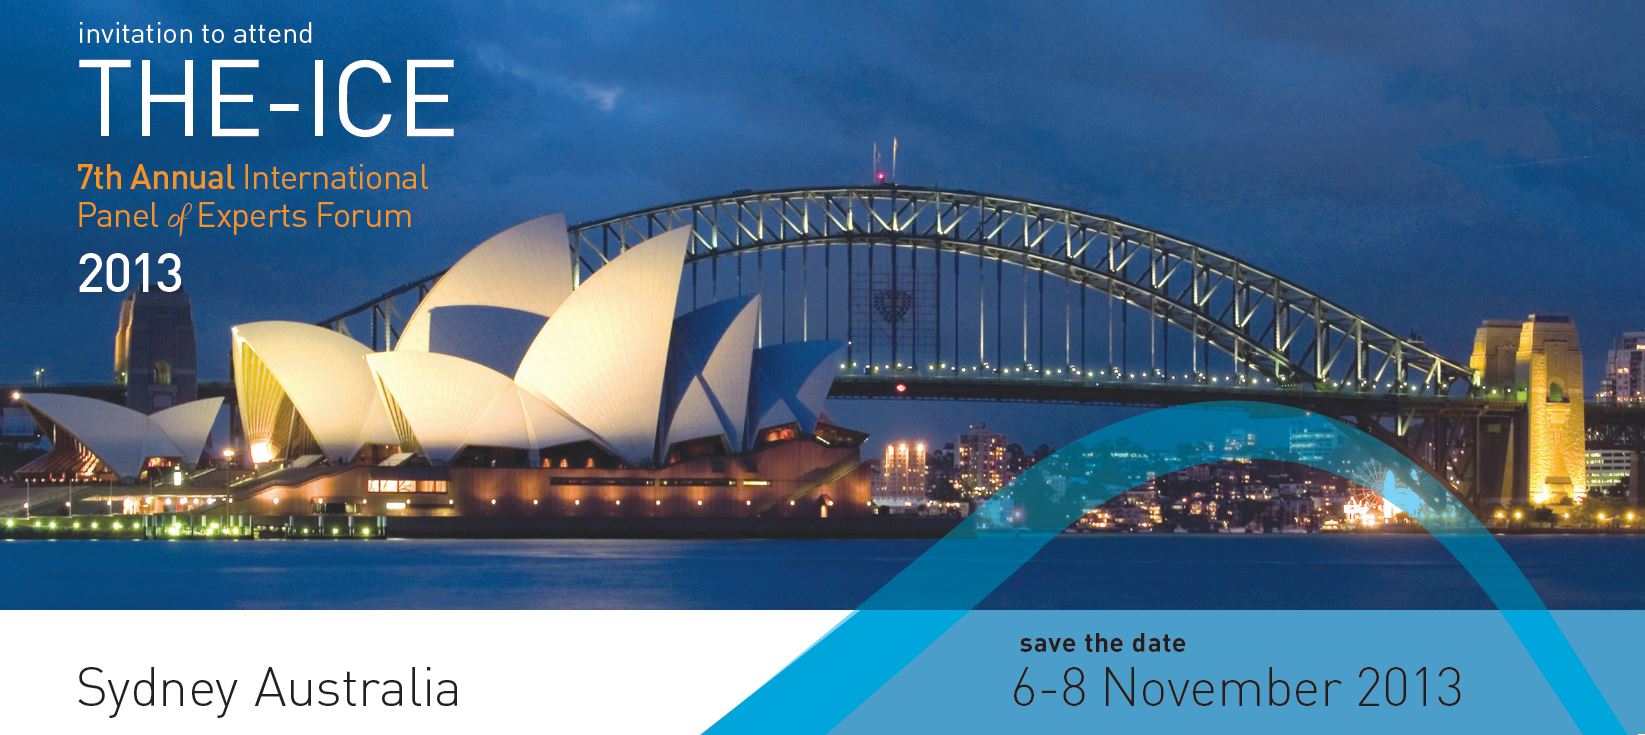 7th-ipoe-forum-2013-save-the-date-image-sydney